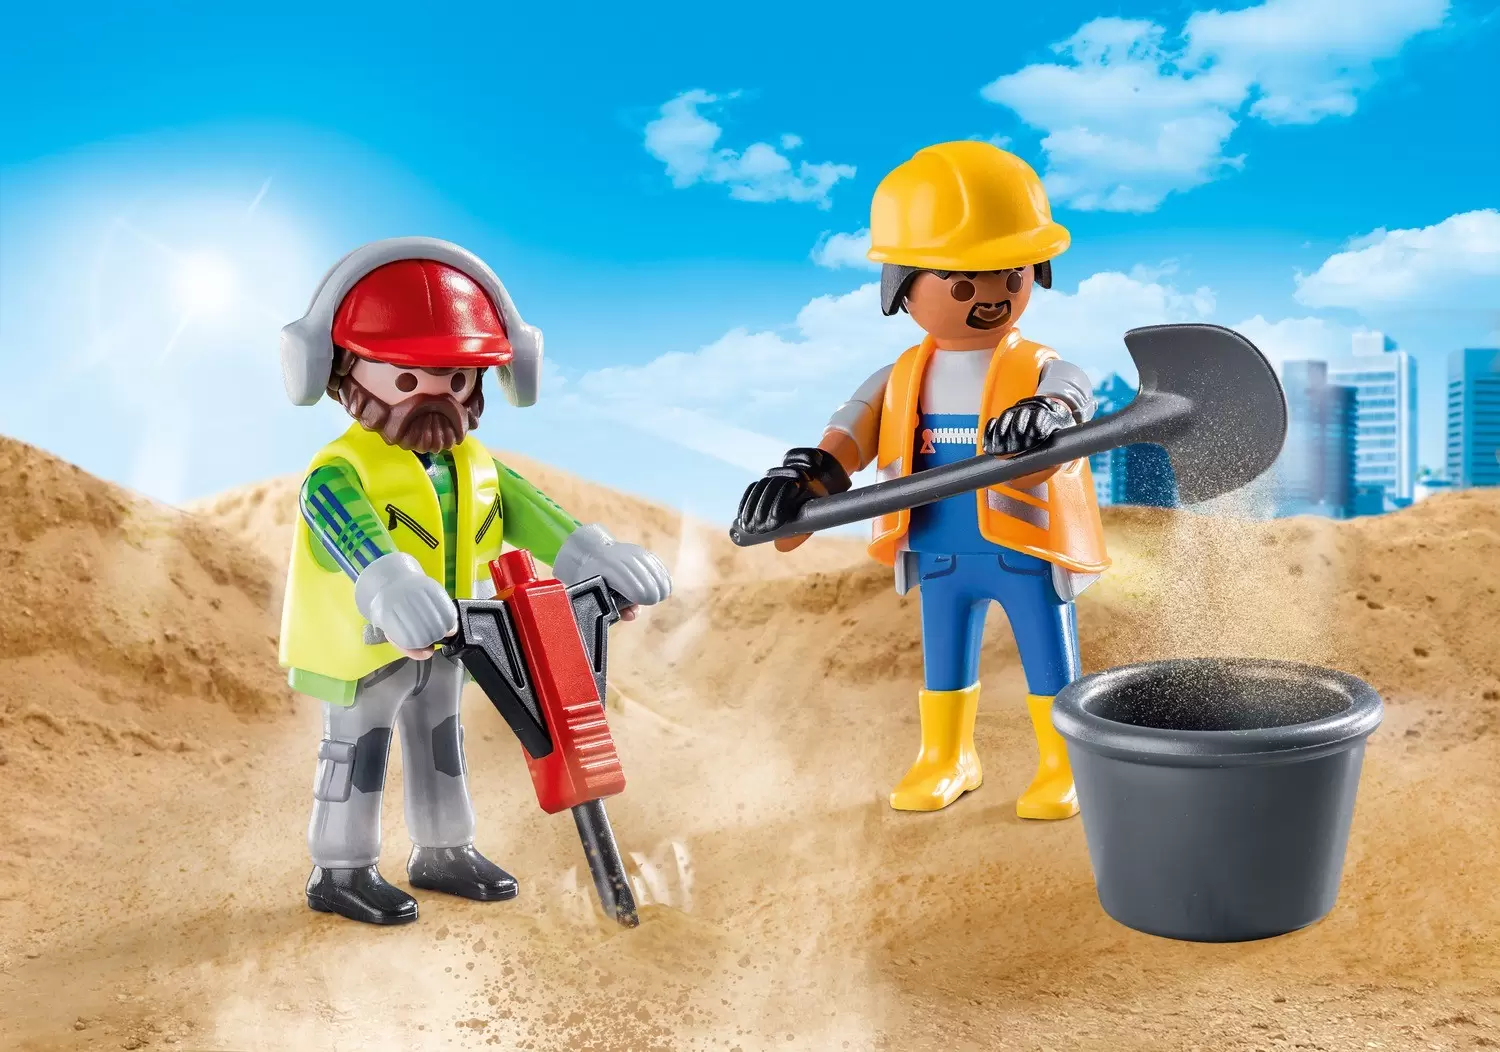 Playmobil Builders - Two construction workers